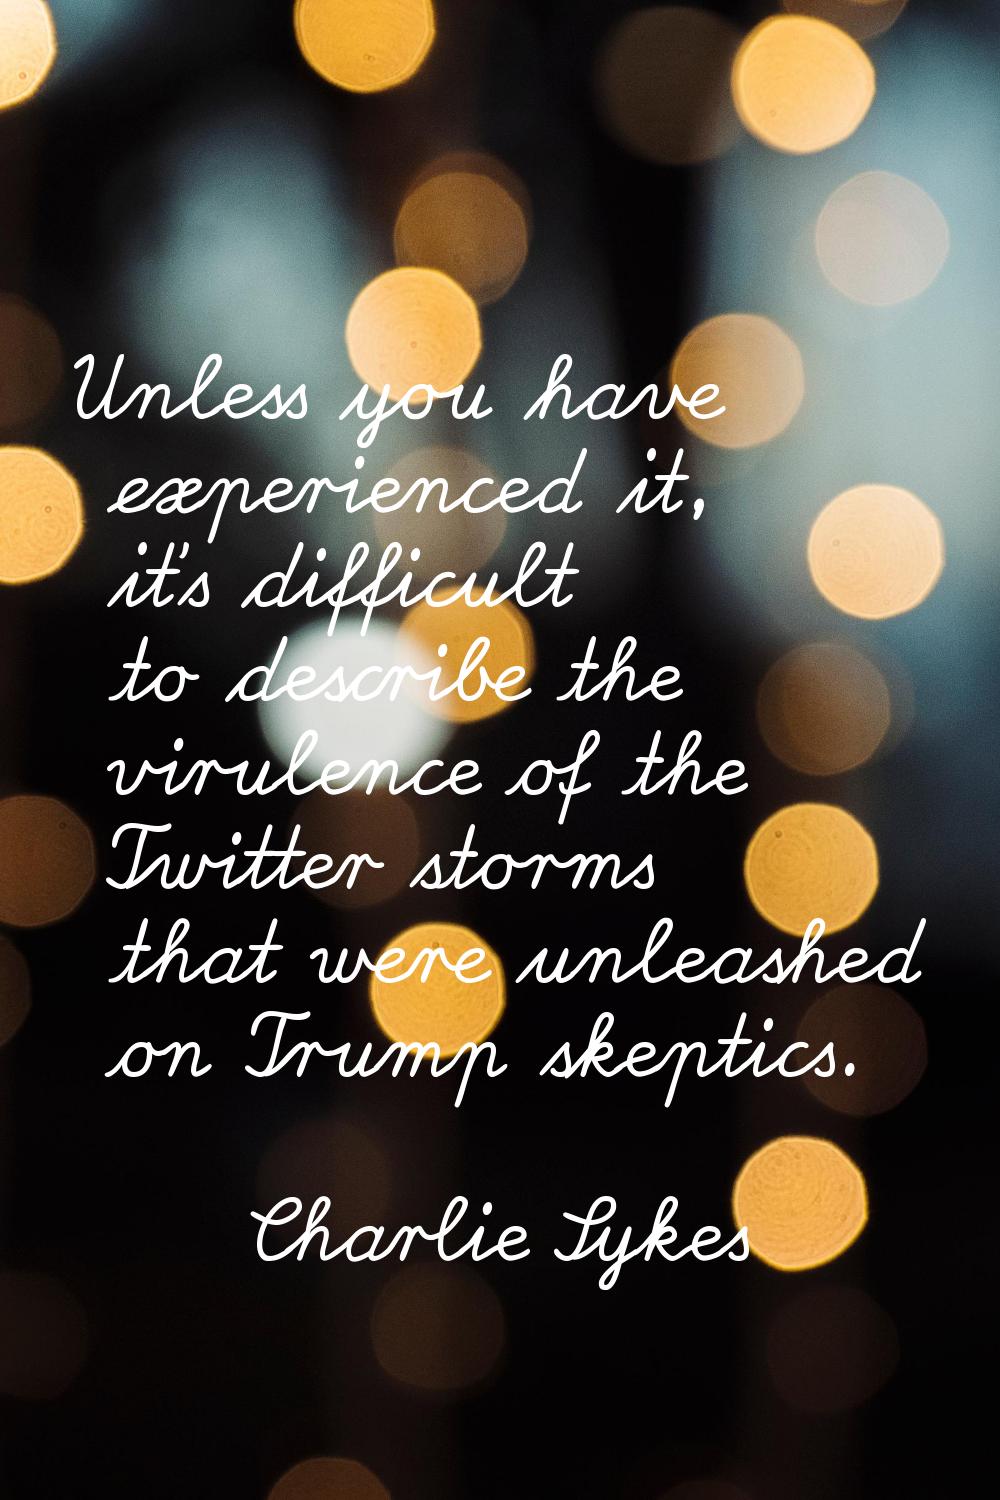 Unless you have experienced it, it's difficult to describe the virulence of the Twitter storms that